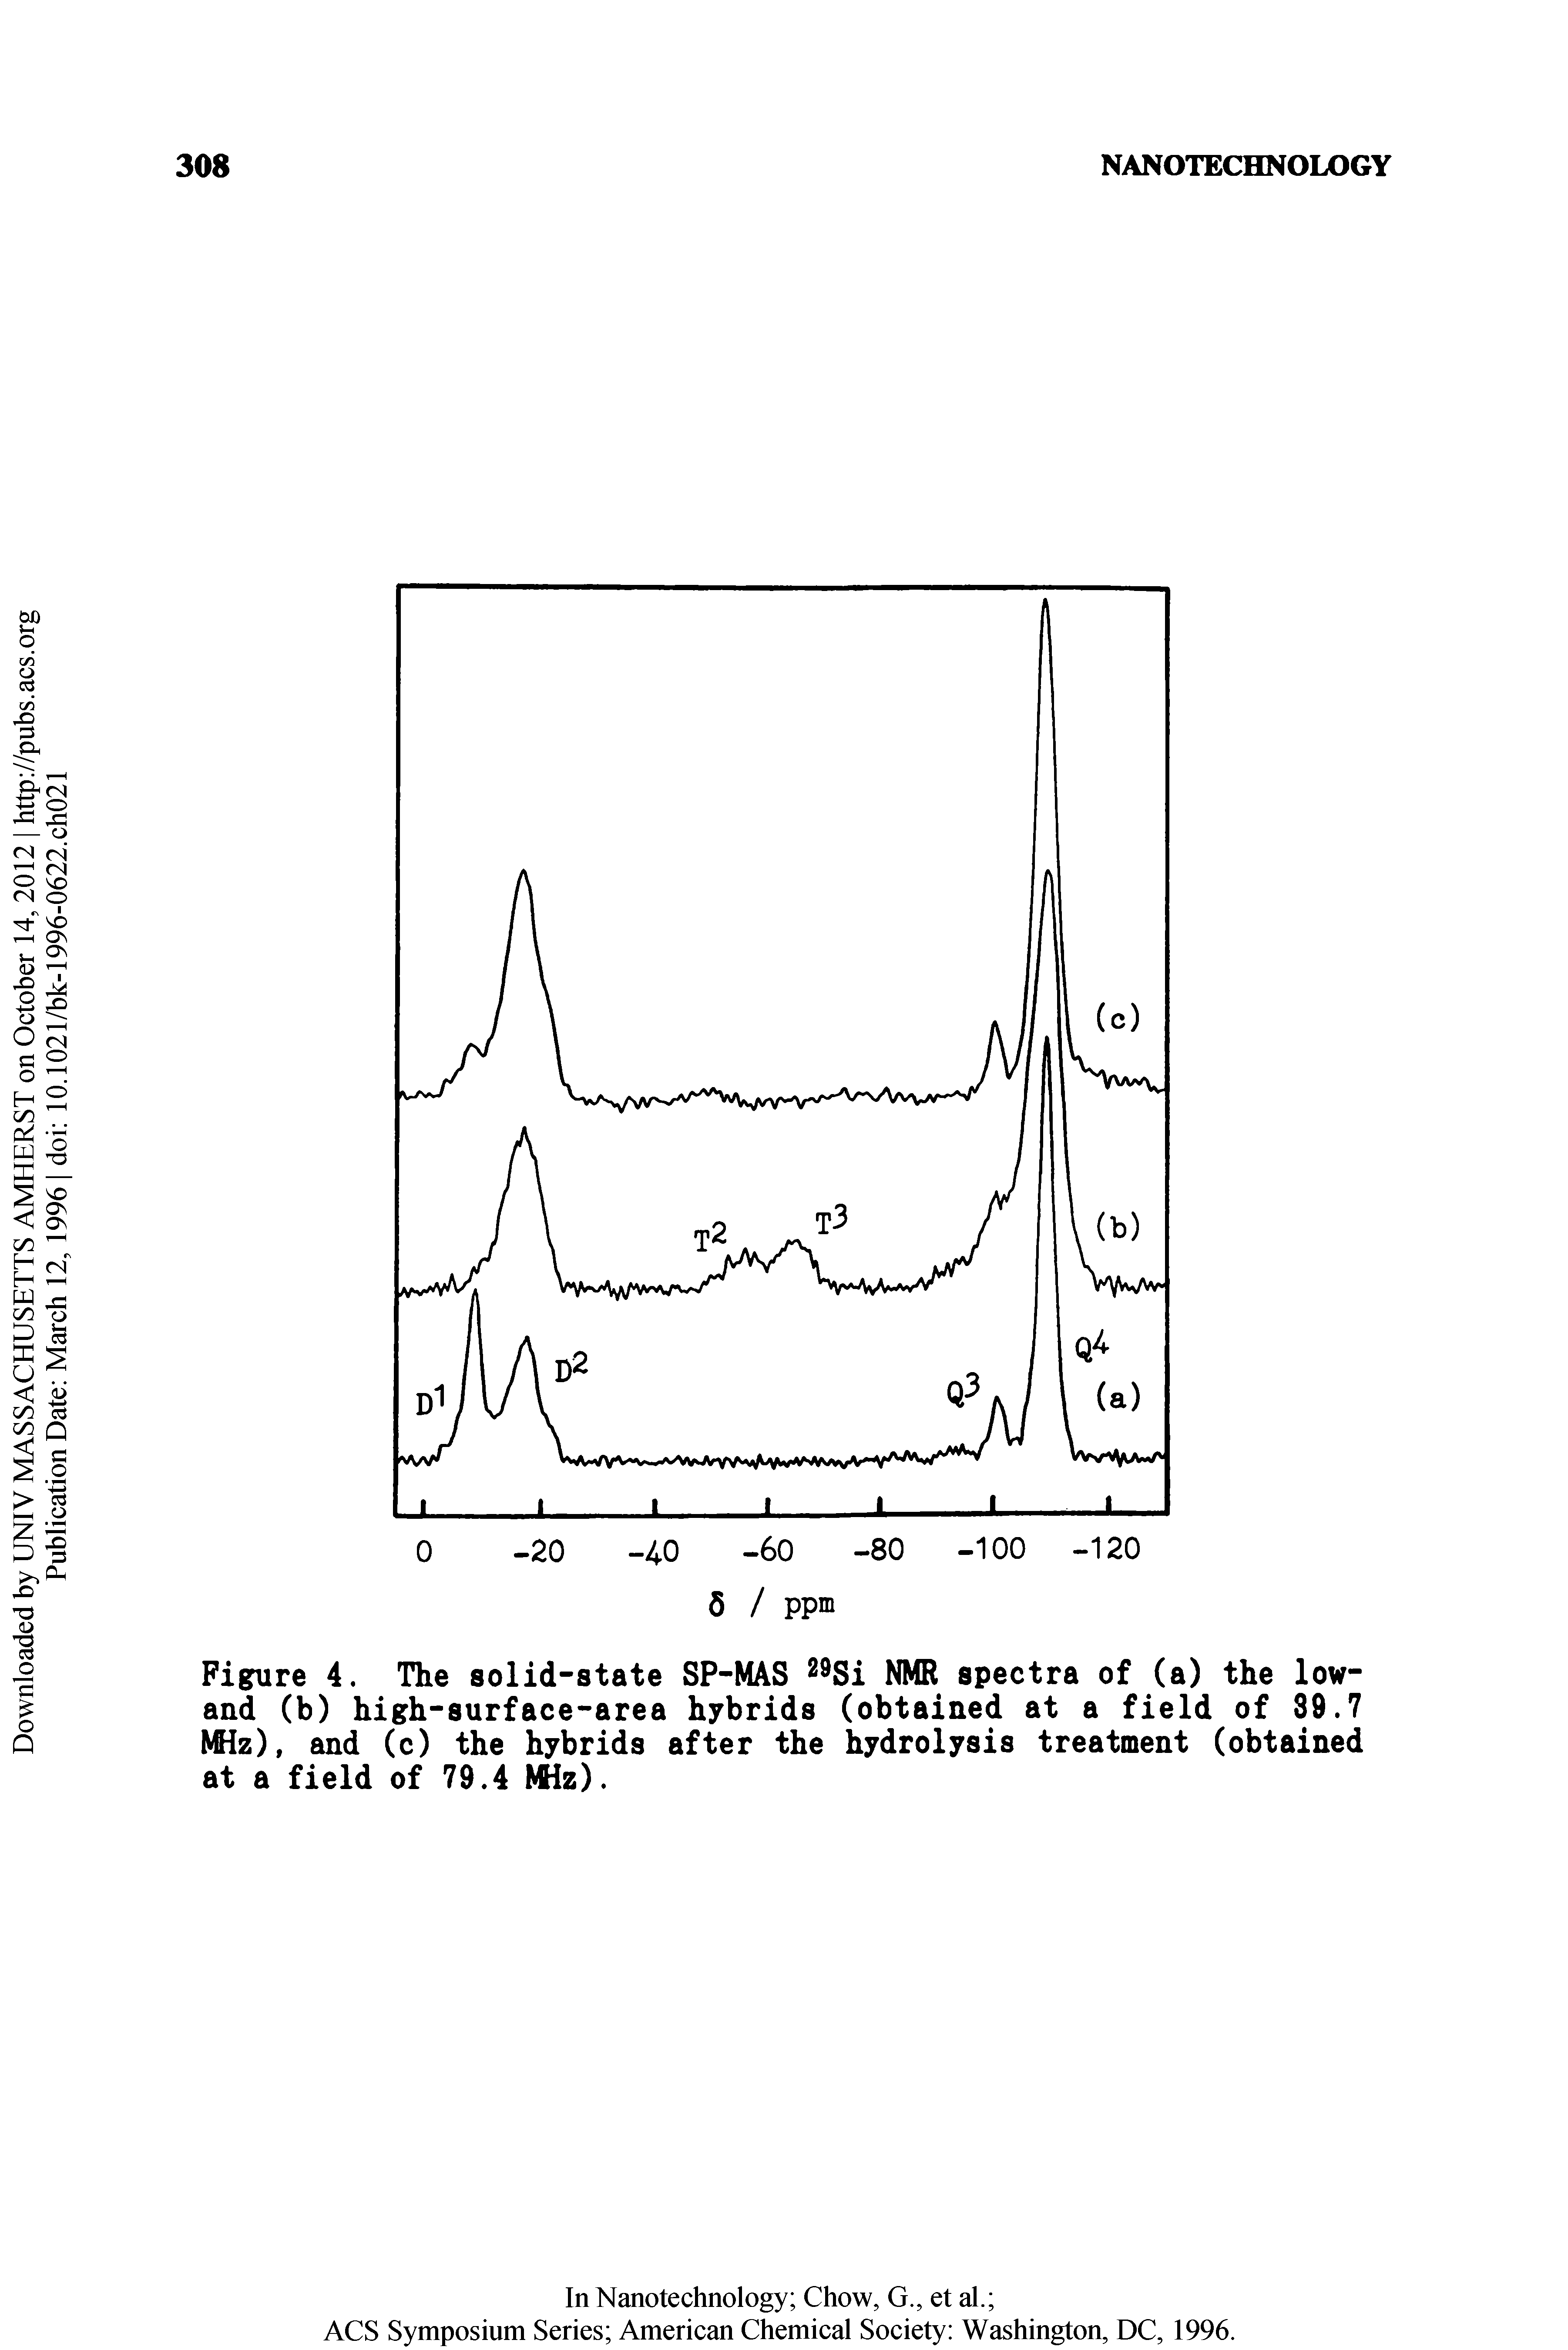 Figure 4, The solid-state SP-MAS 29si NMR spectra of (a) the low-and (b) high-surface-area hybrids (obtained at a field of 39.7 MHz), and (c) the hybrids after the hydrolysis treatment (obtained at a field of 79.4 MHz).